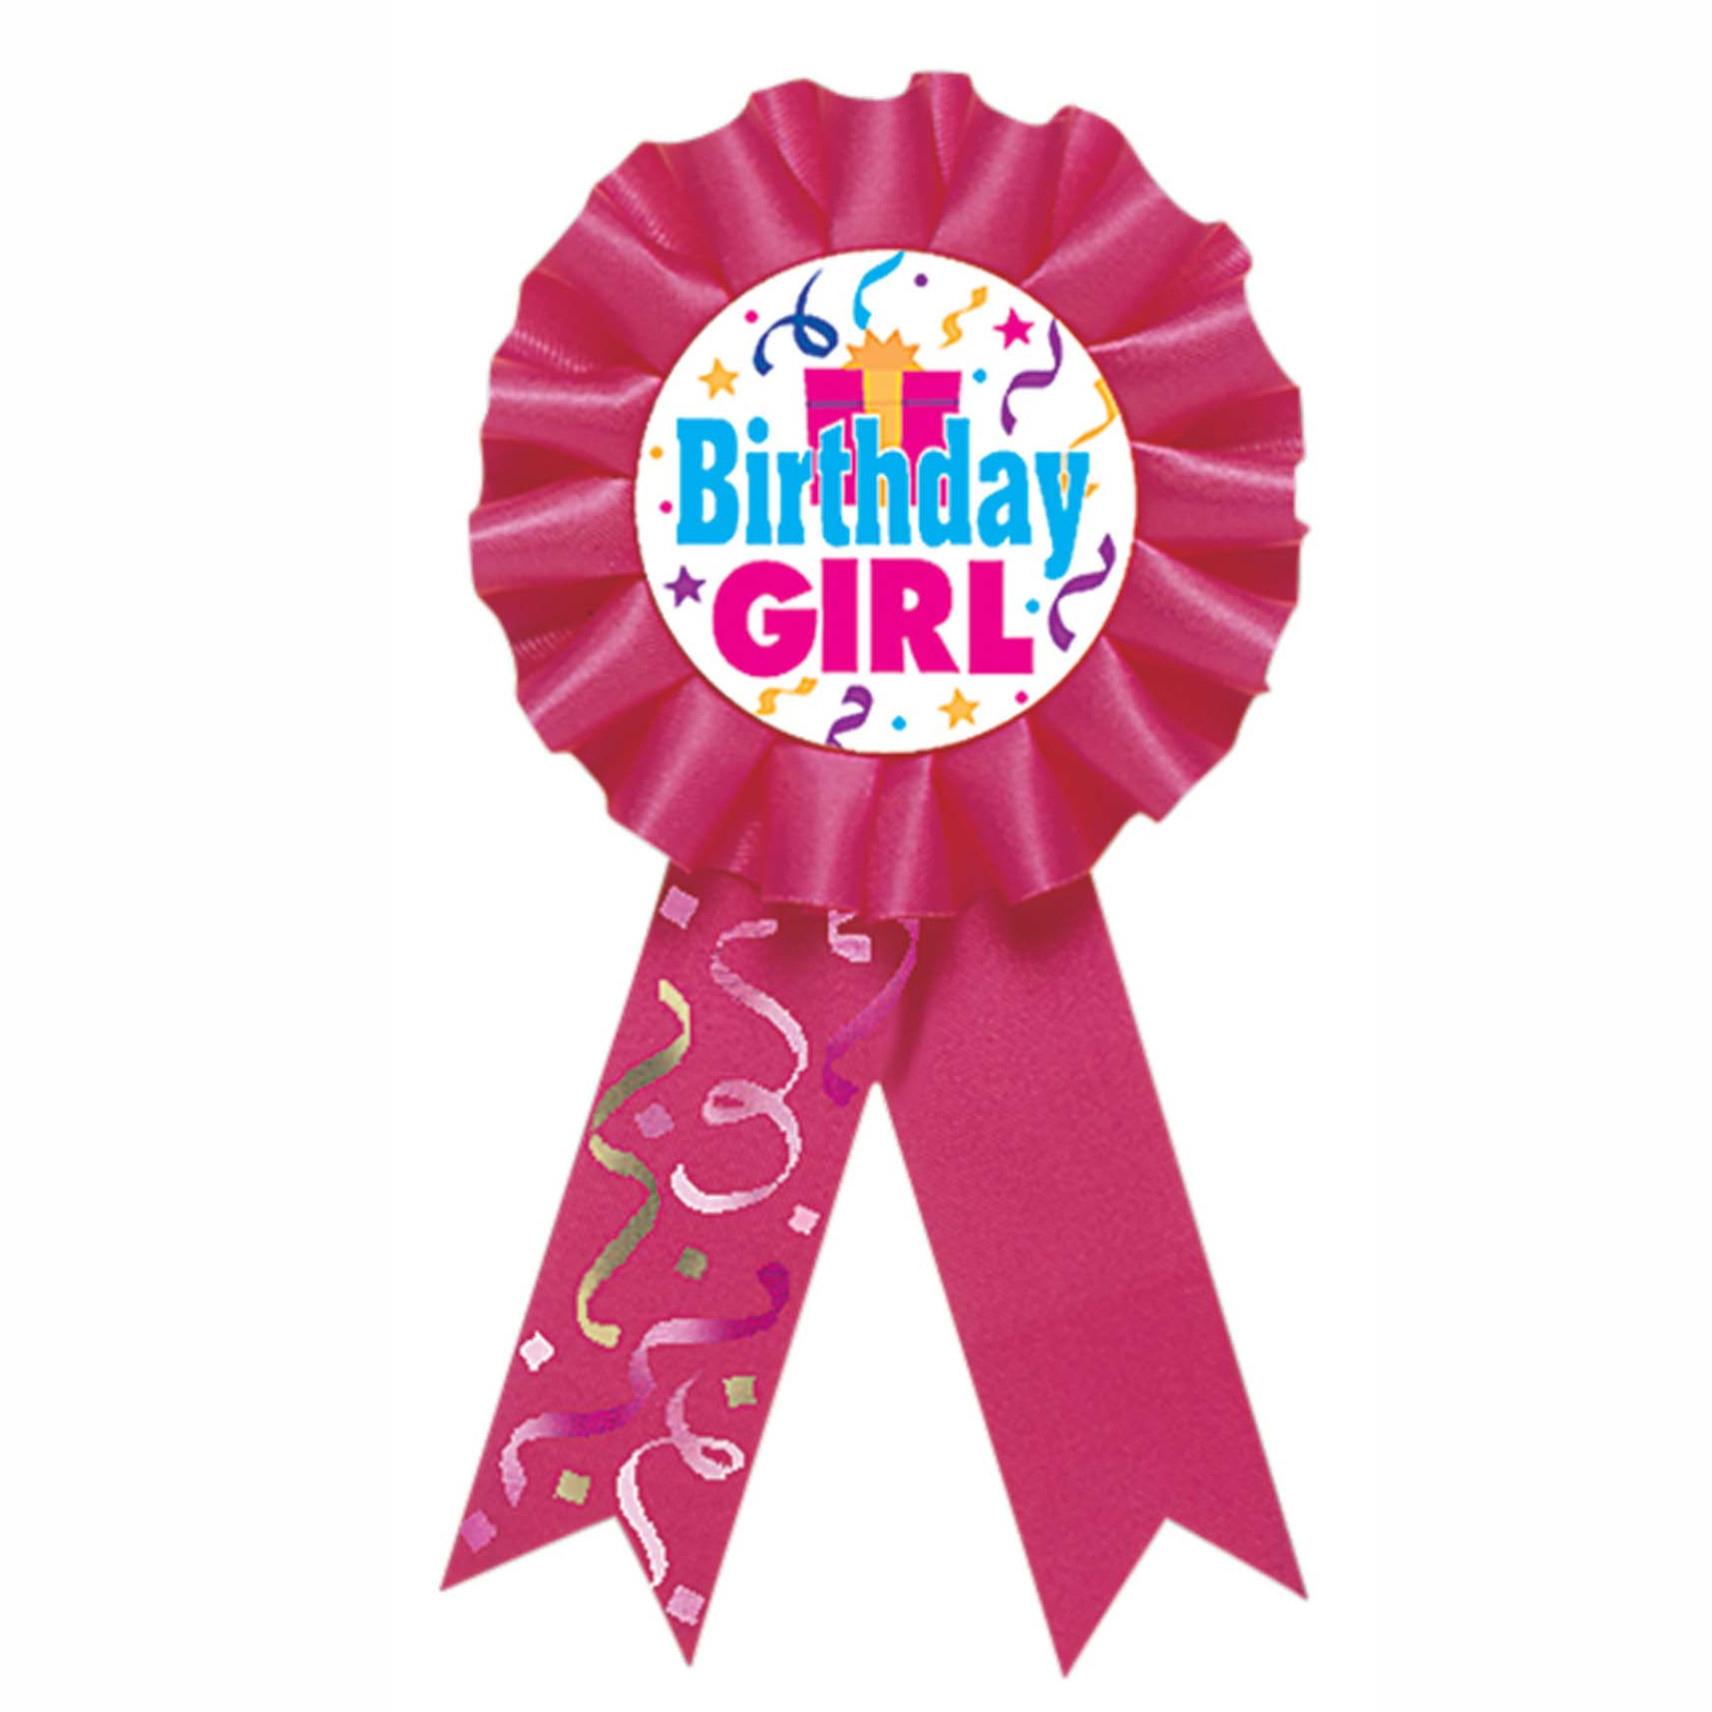 Birthday Girl Award Ribbon Party Accessories - Party Centre